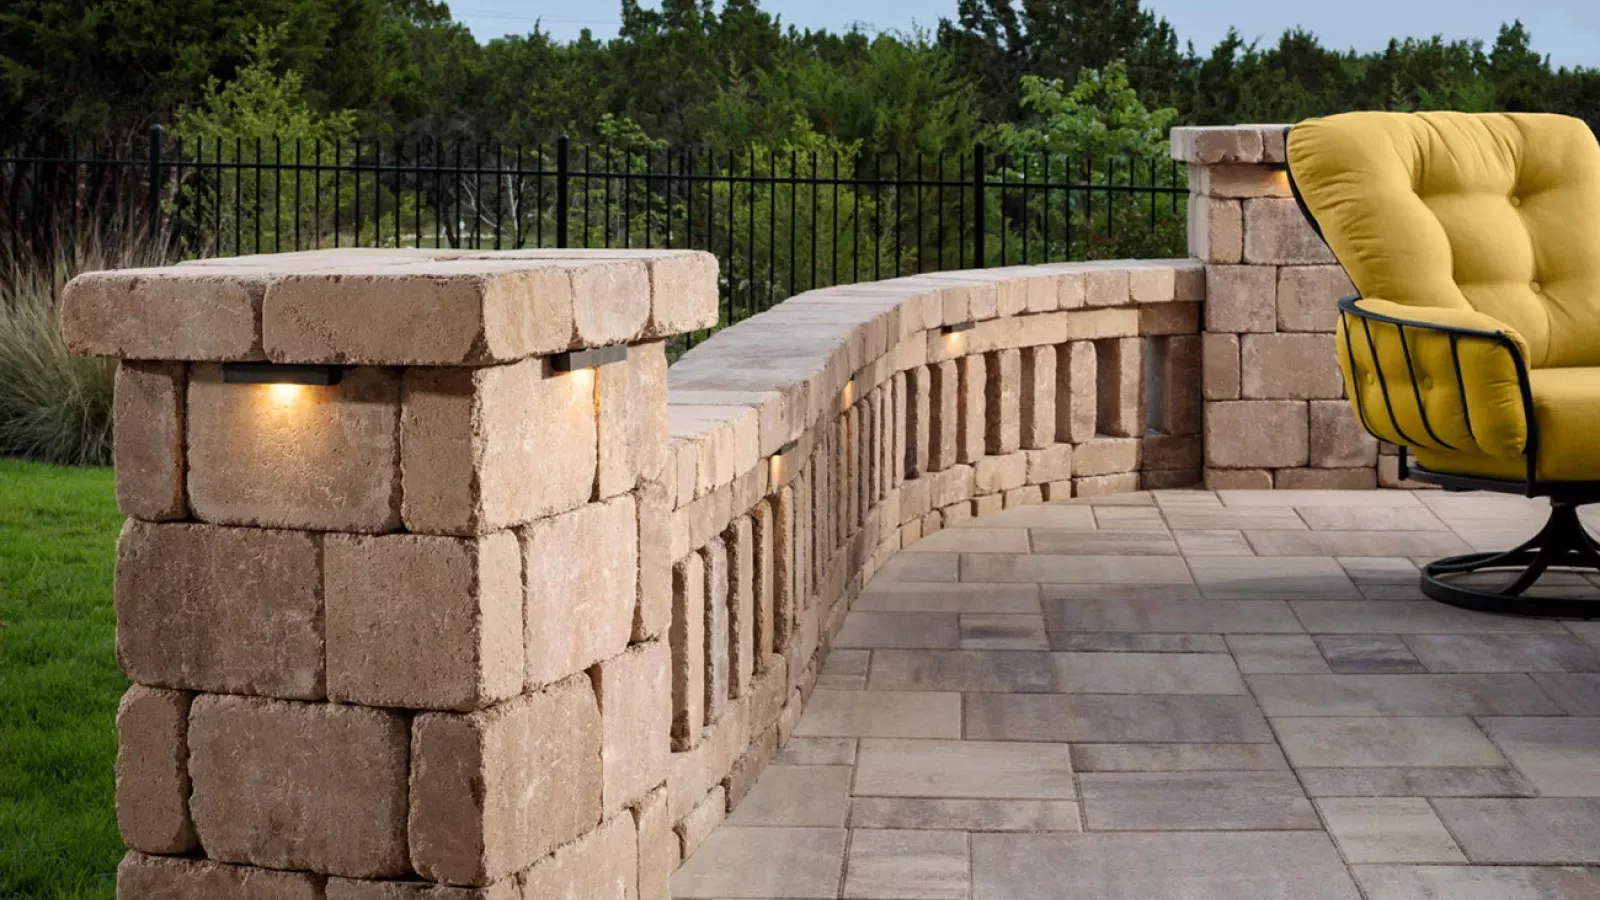 Weston Stone™ wall system installed by AR Stoneworks, showcasing versatility and natural stone design